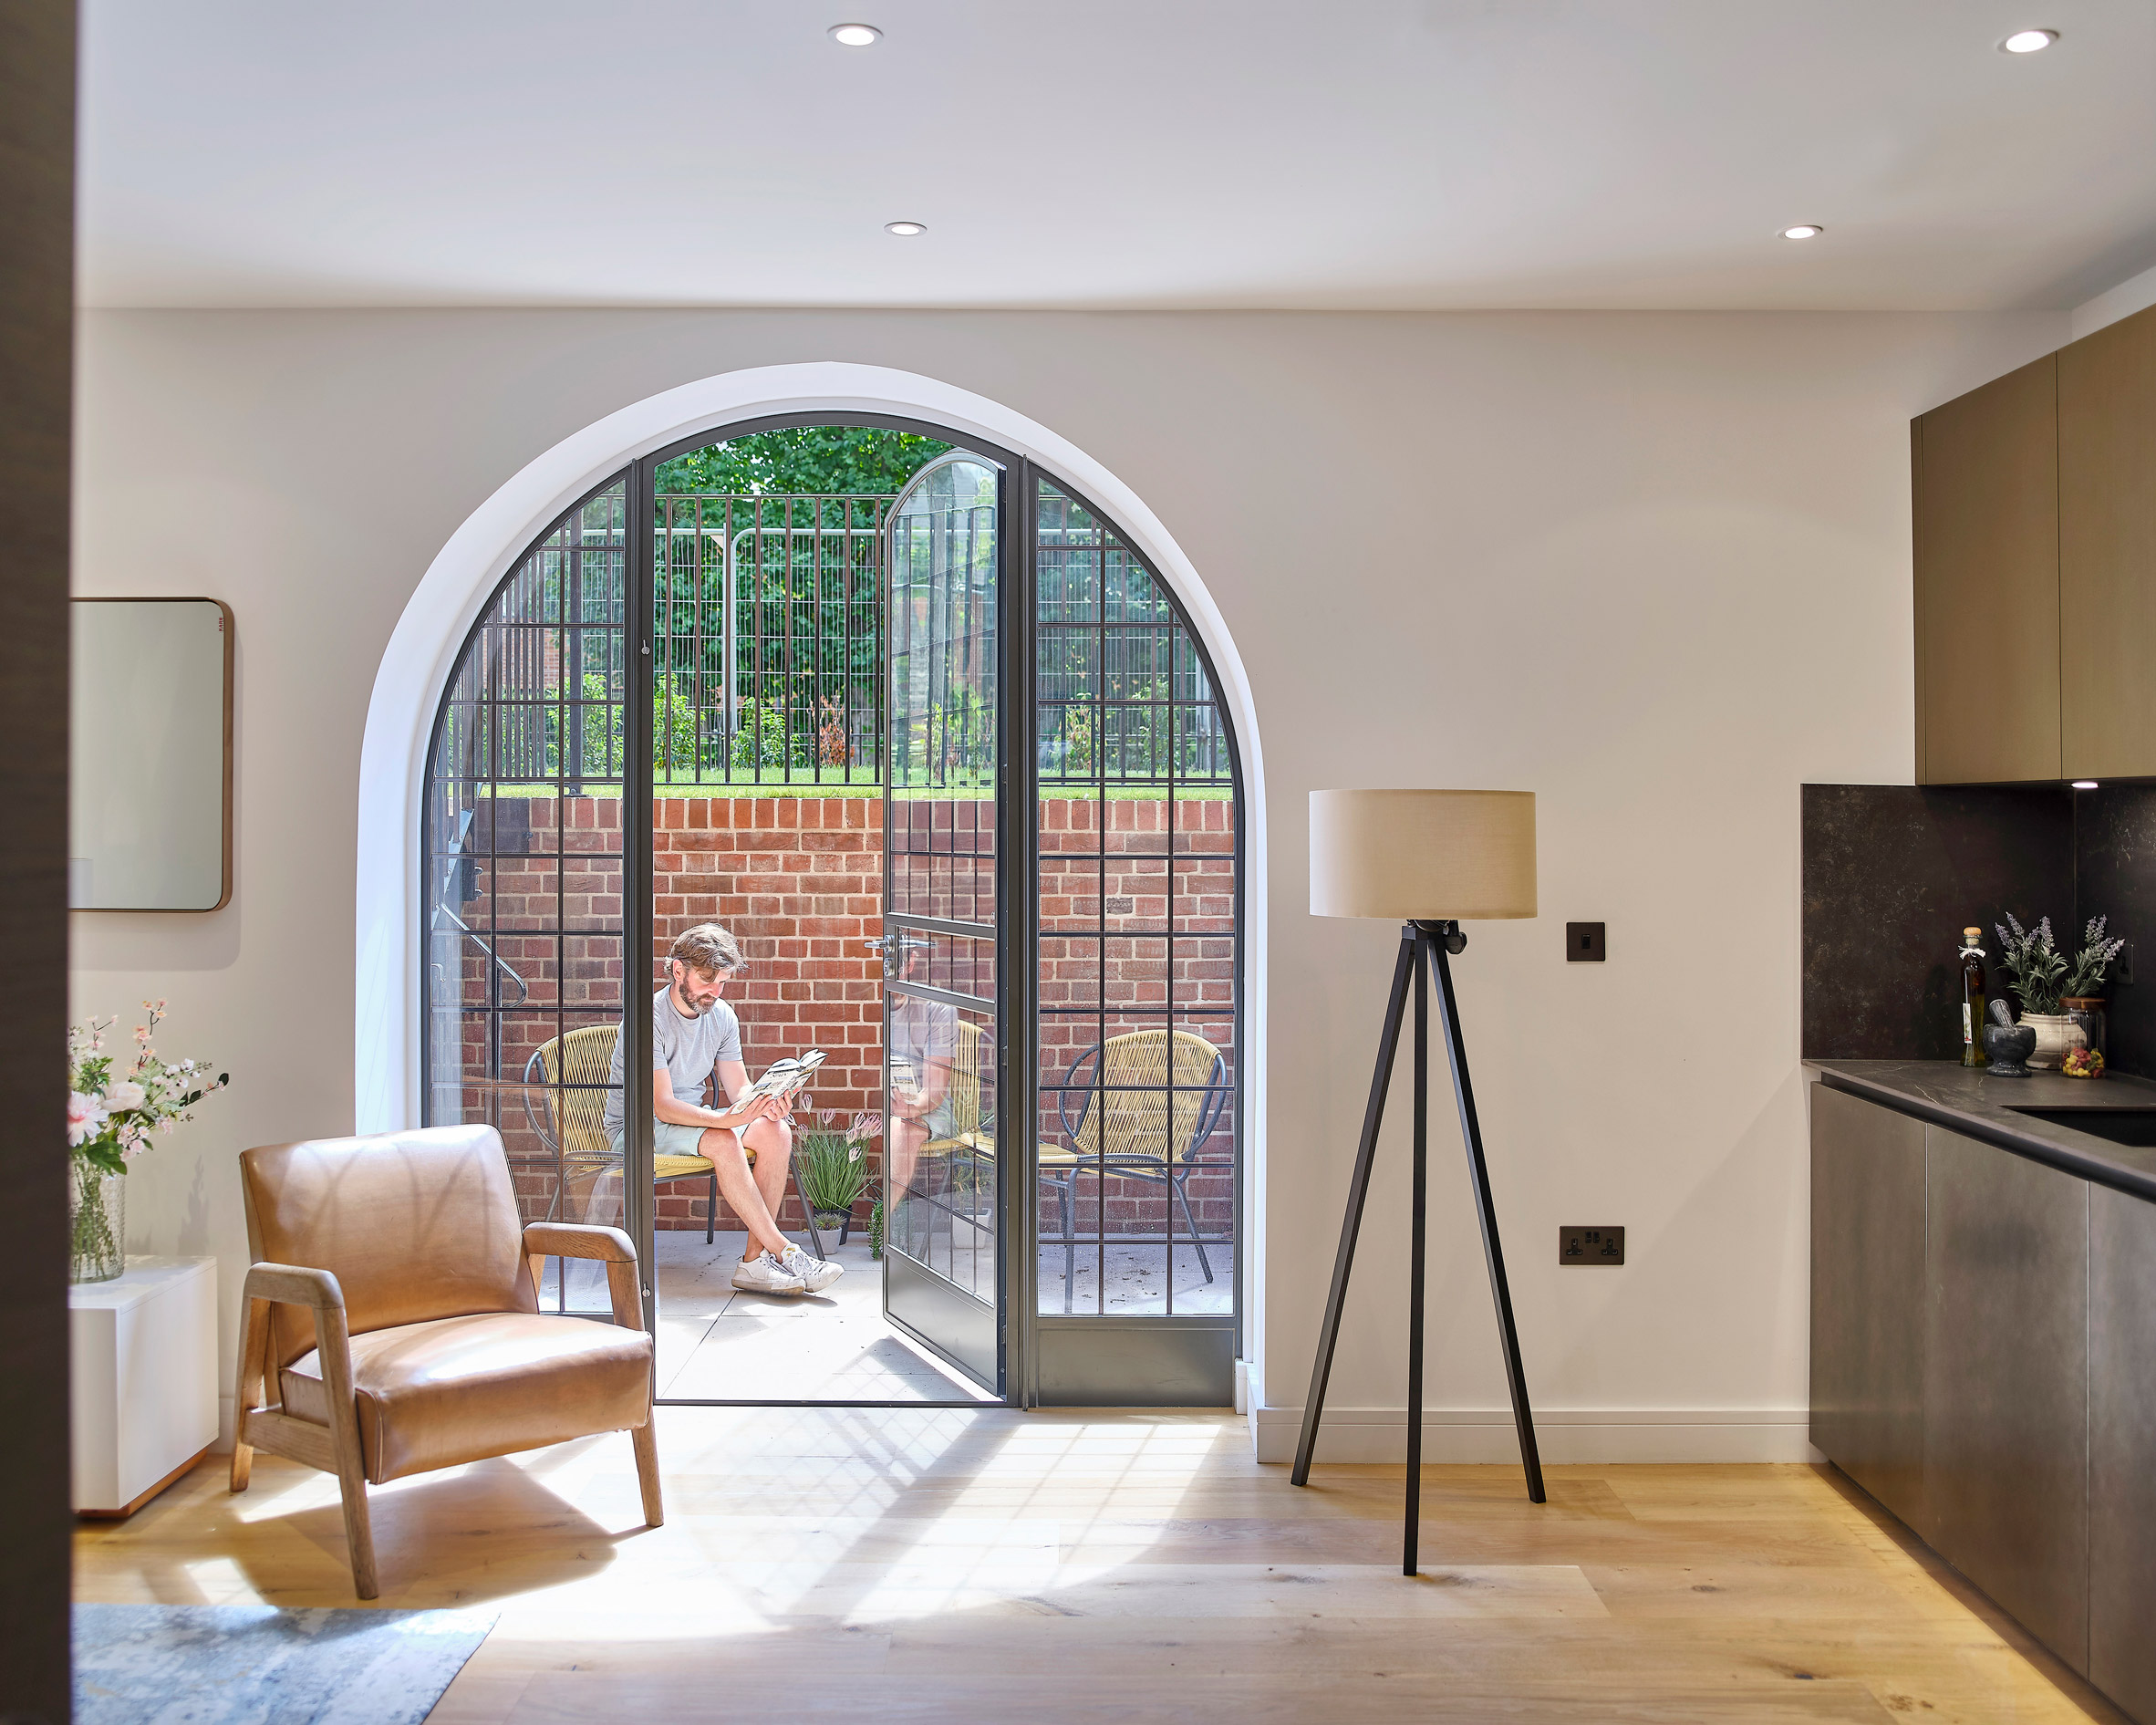 Basement apartment of Belsize Fire Station converted into apartments by Tate Harmer, London